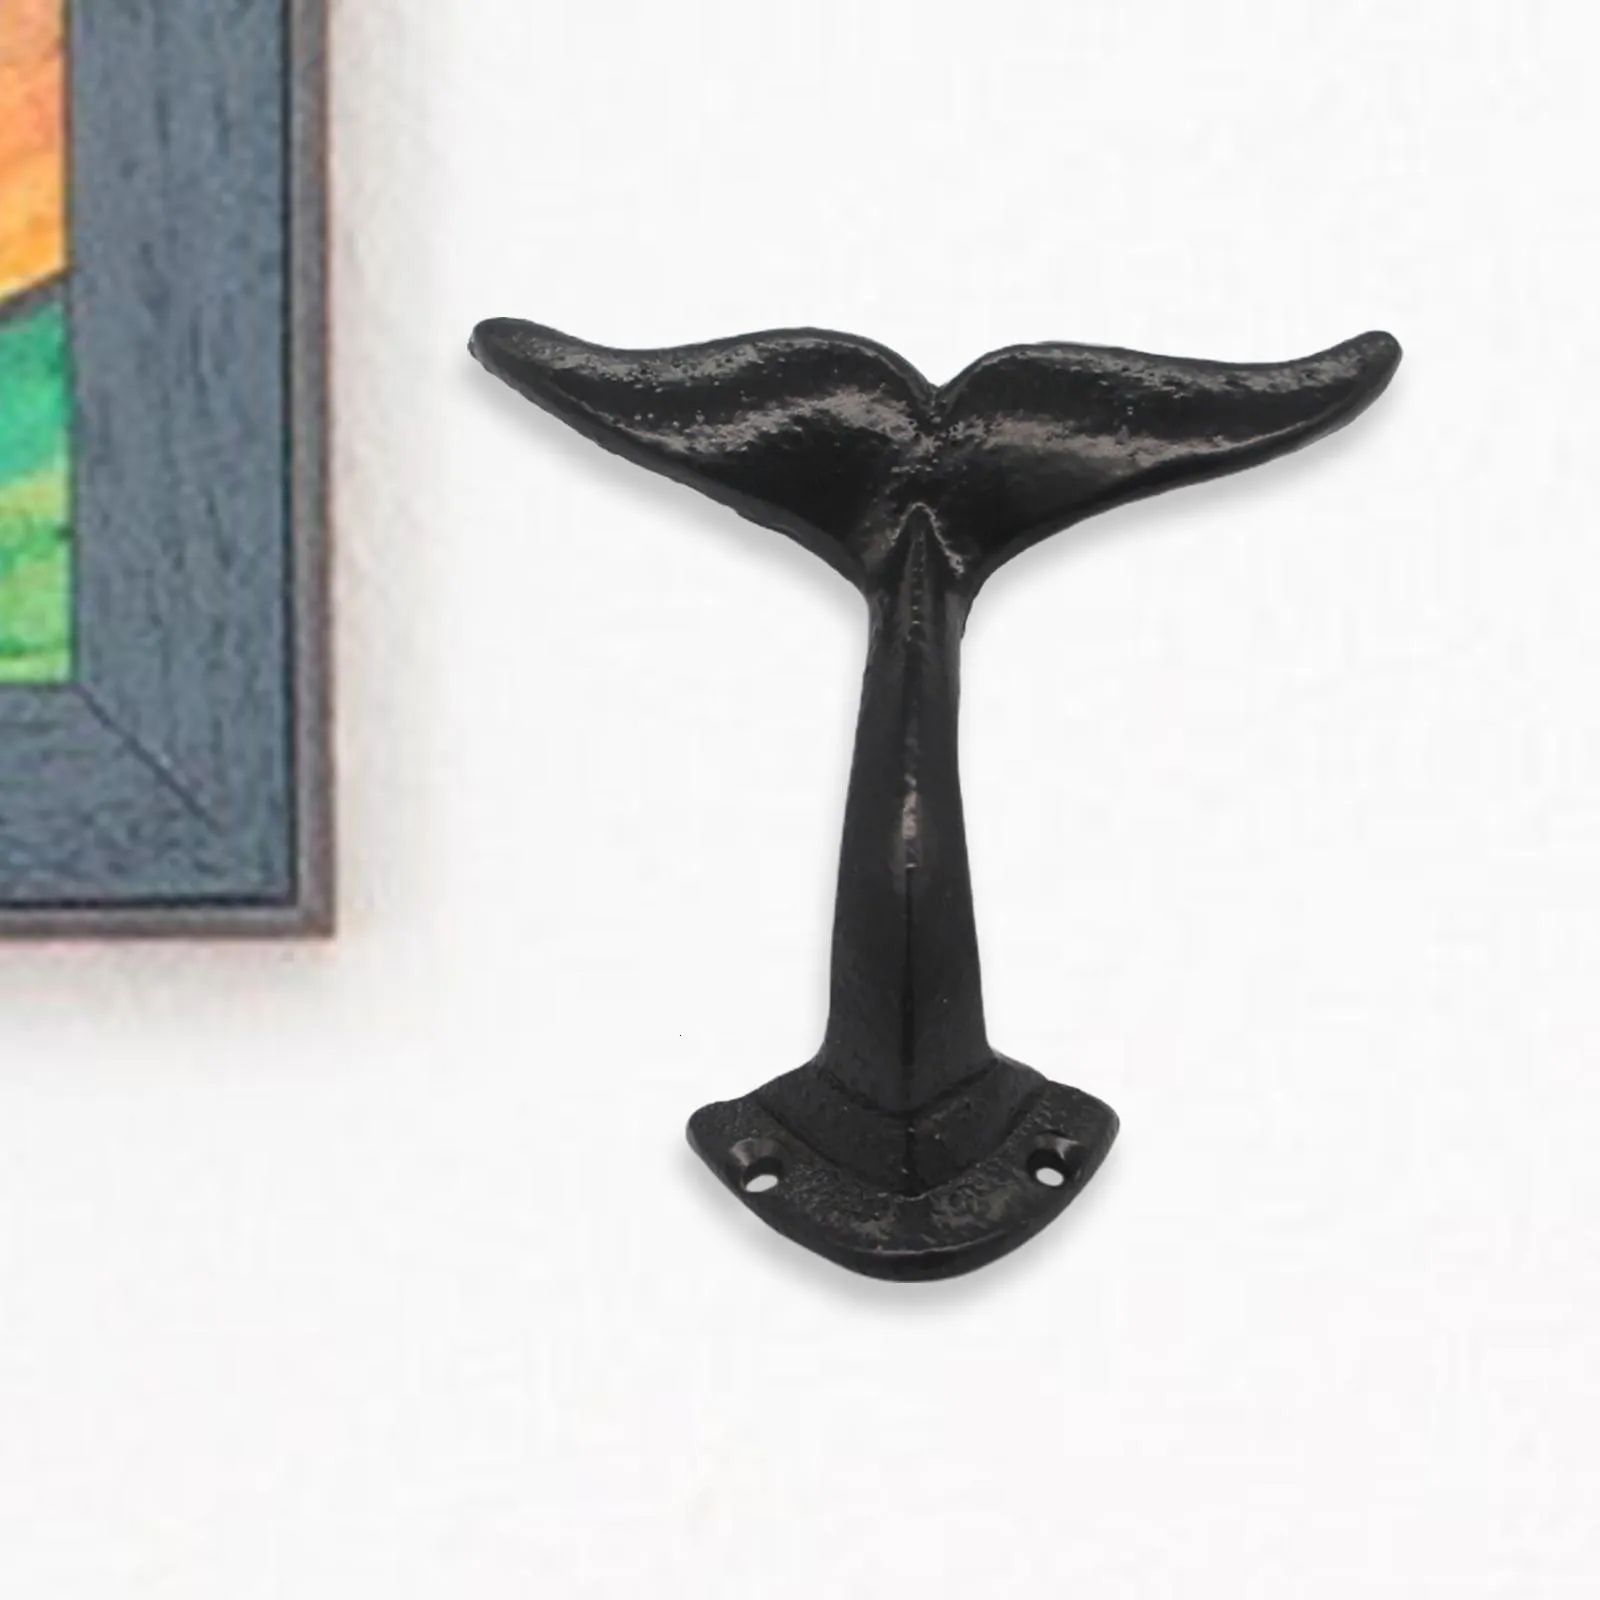 Cast Iron Whale Tail Wall Hook For Vintage Metal Bathroom Shelf, Clothes,  And Coats Decorative Hanging Hook Decoration 230628 From Wai09, $8.42